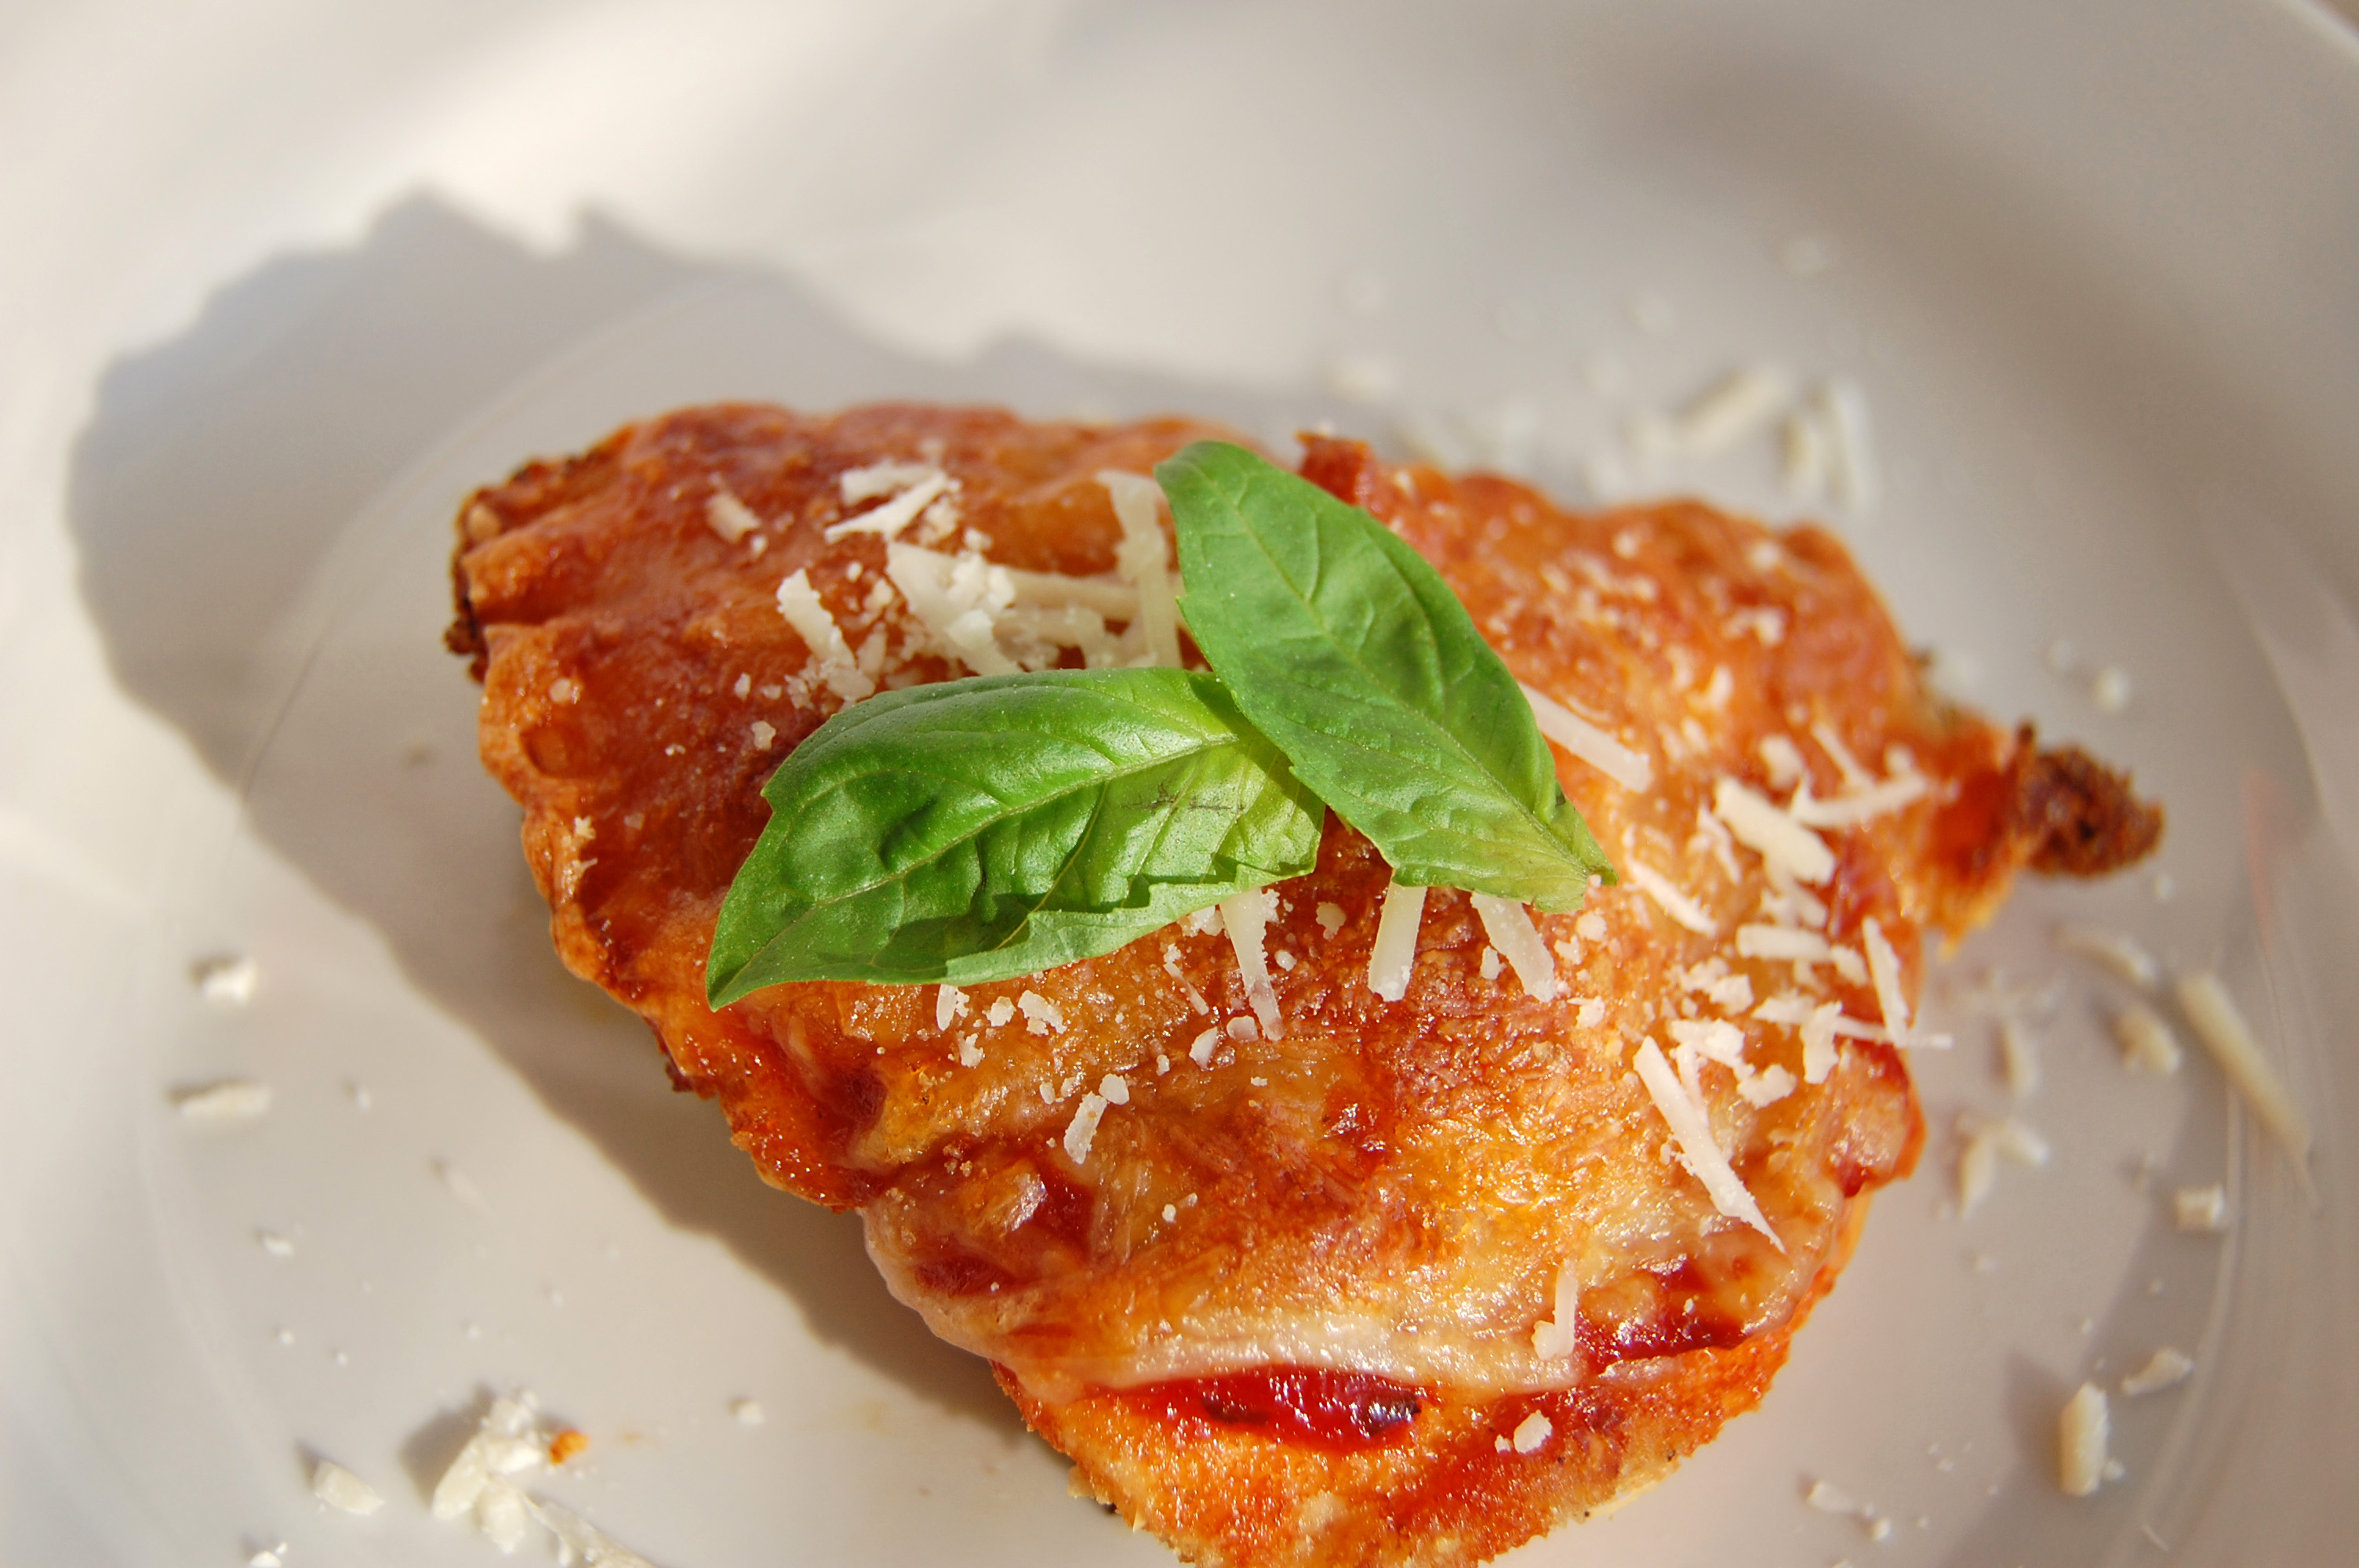 Here's a more healthful version of a family favorite - chicken Parmesan. (NDSU photo)